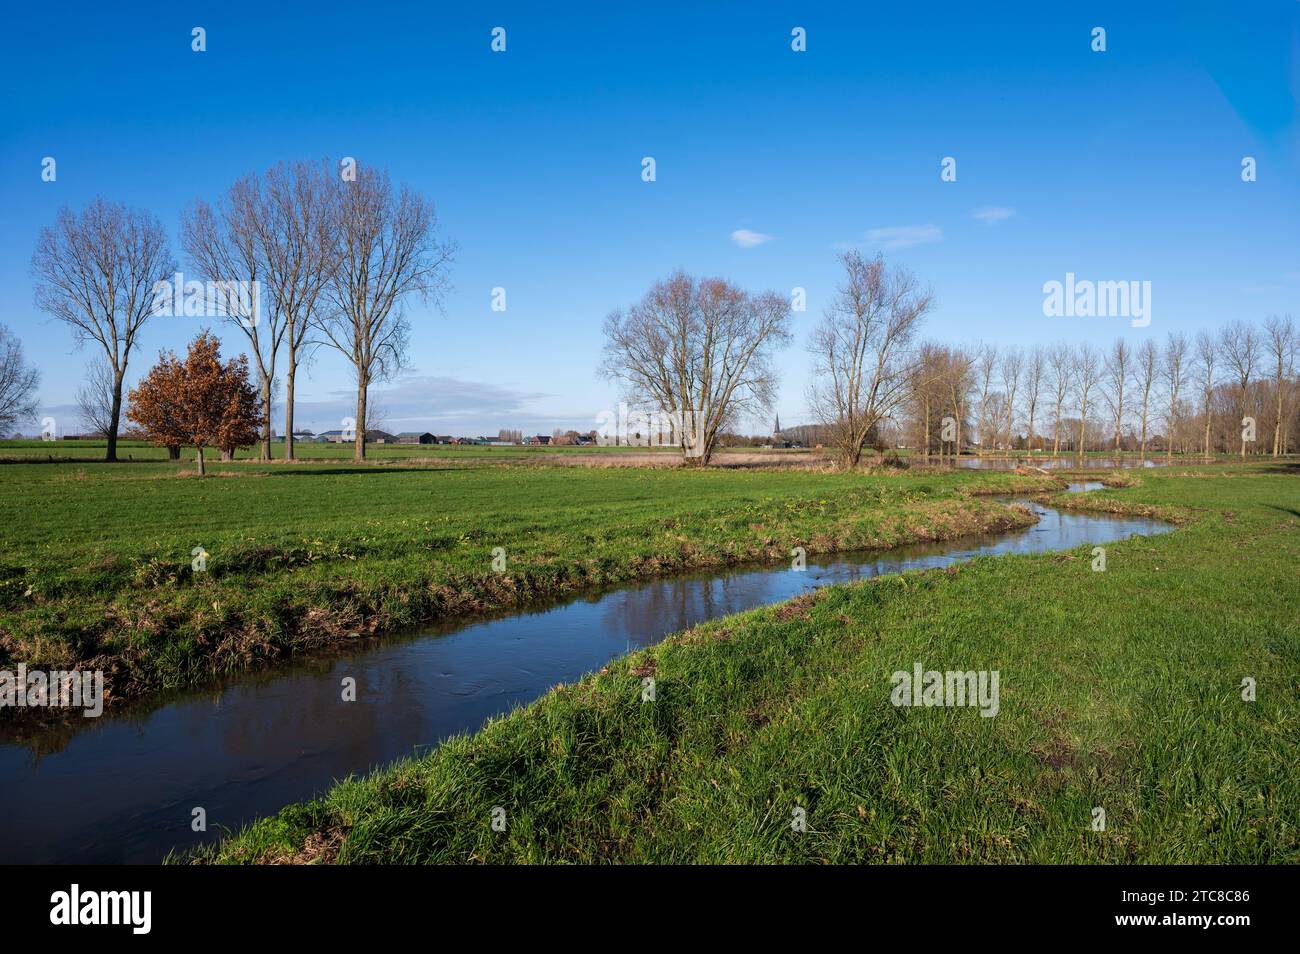 Bending creek through the wetlands and meadows at the Flemish countryside around Imde, Meise, Belgium Credit: Imago/Alamy Live News Stock Photo